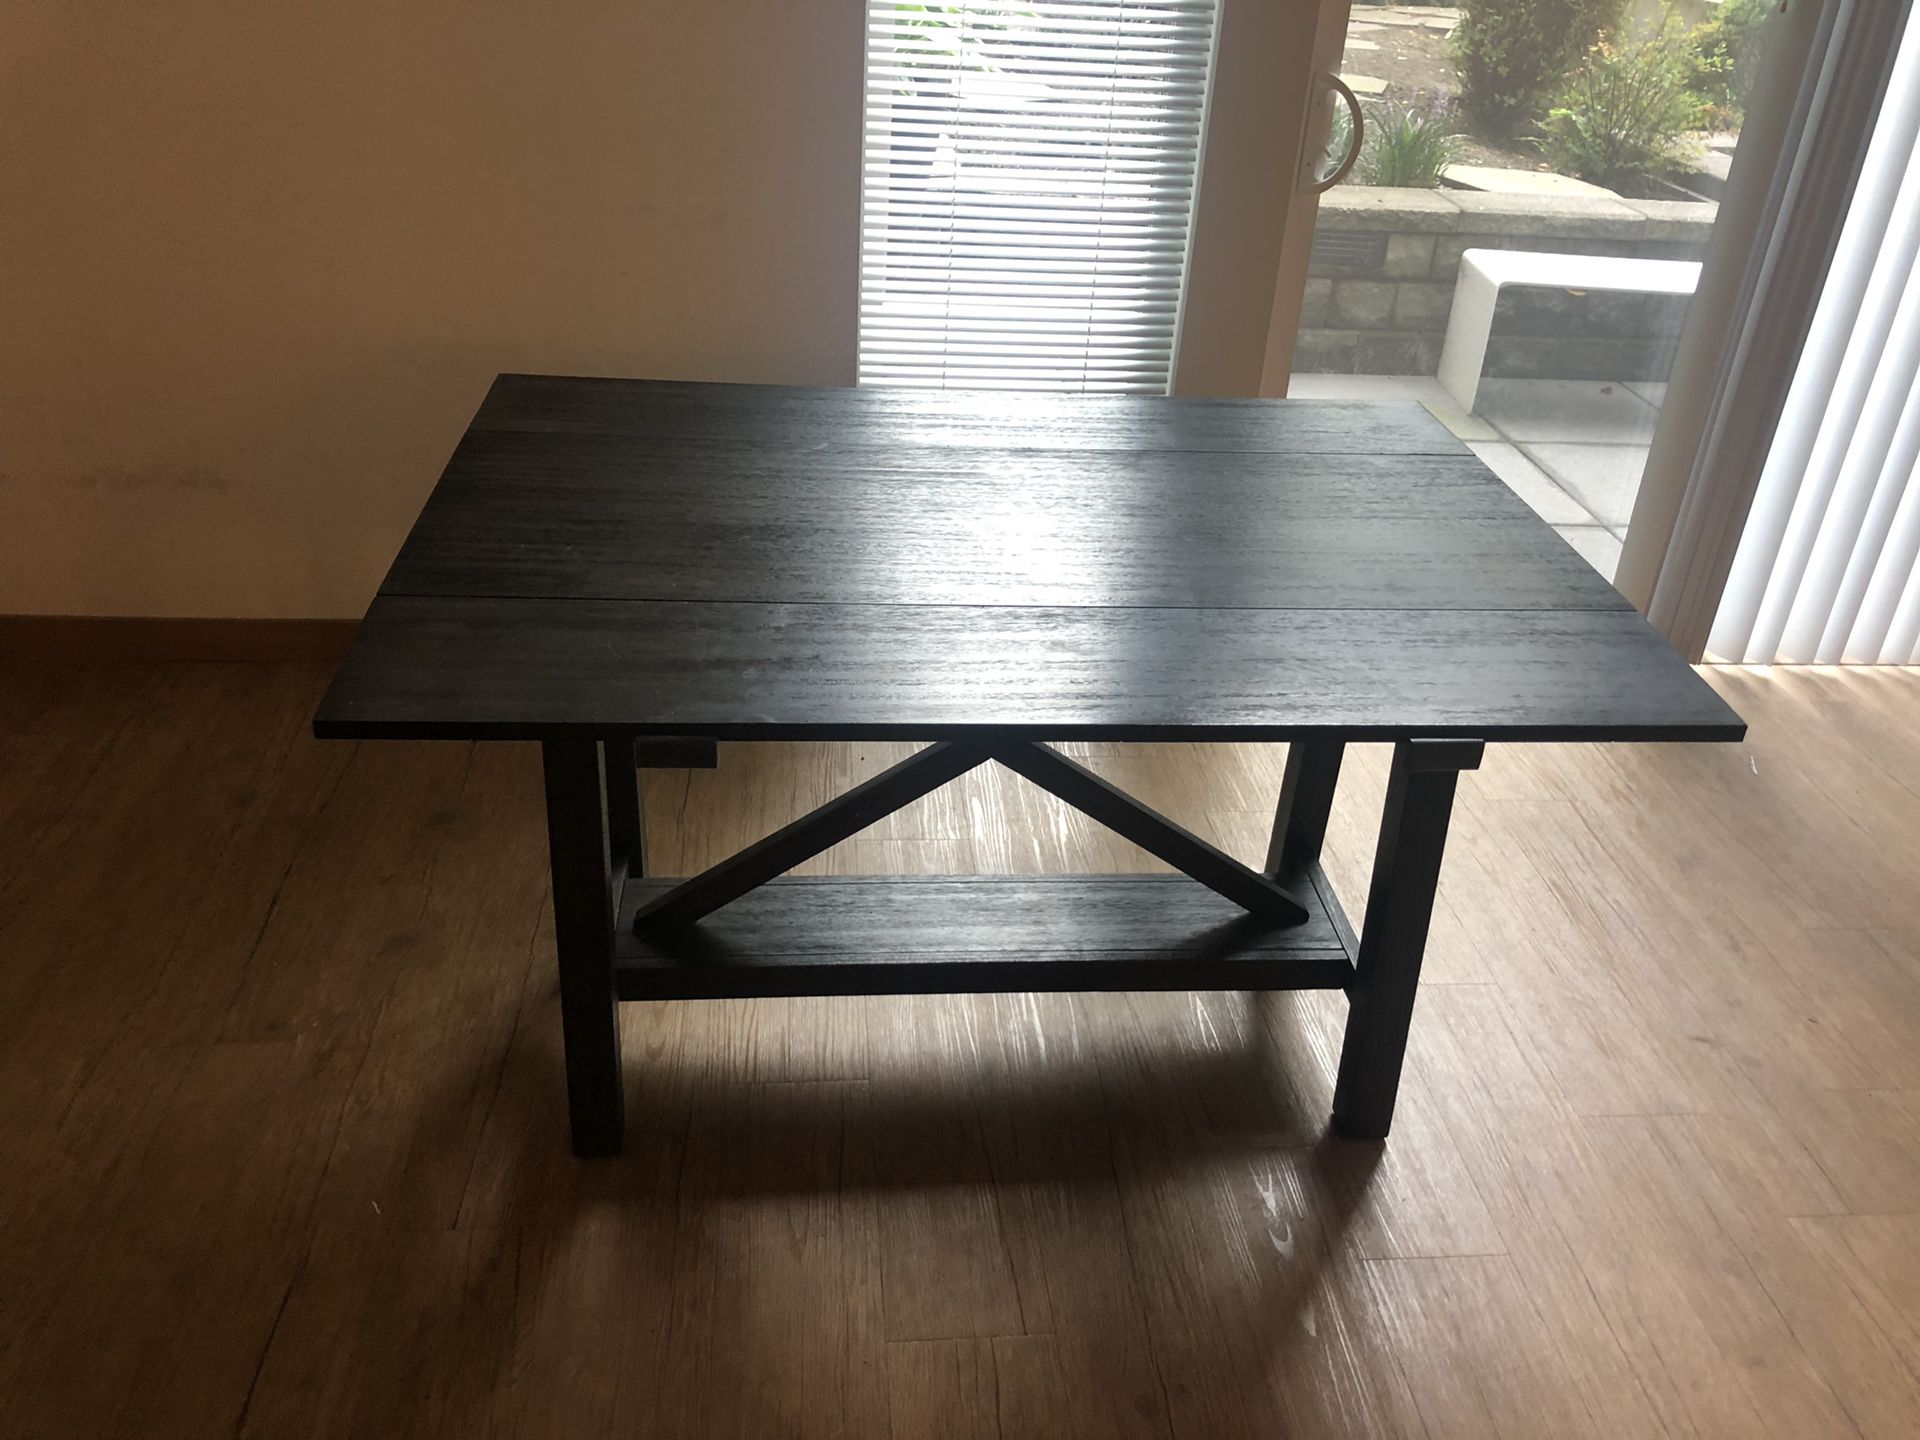 Grey wooden collapsible table! Cute for dining or entryway